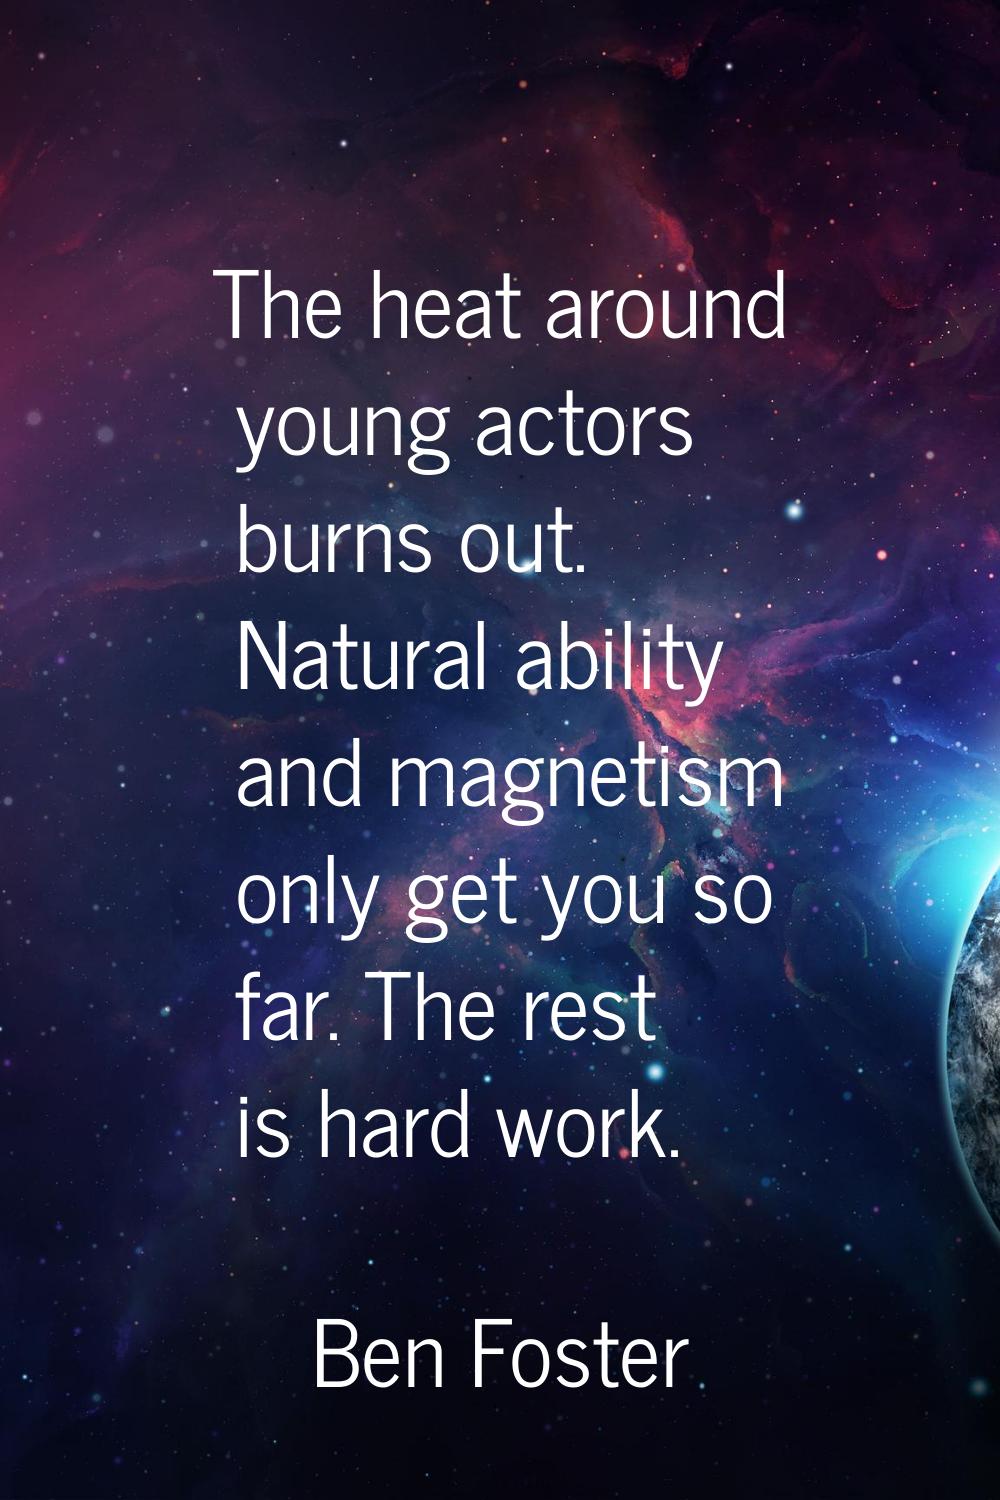 The heat around young actors burns out. Natural ability and magnetism only get you so far. The rest